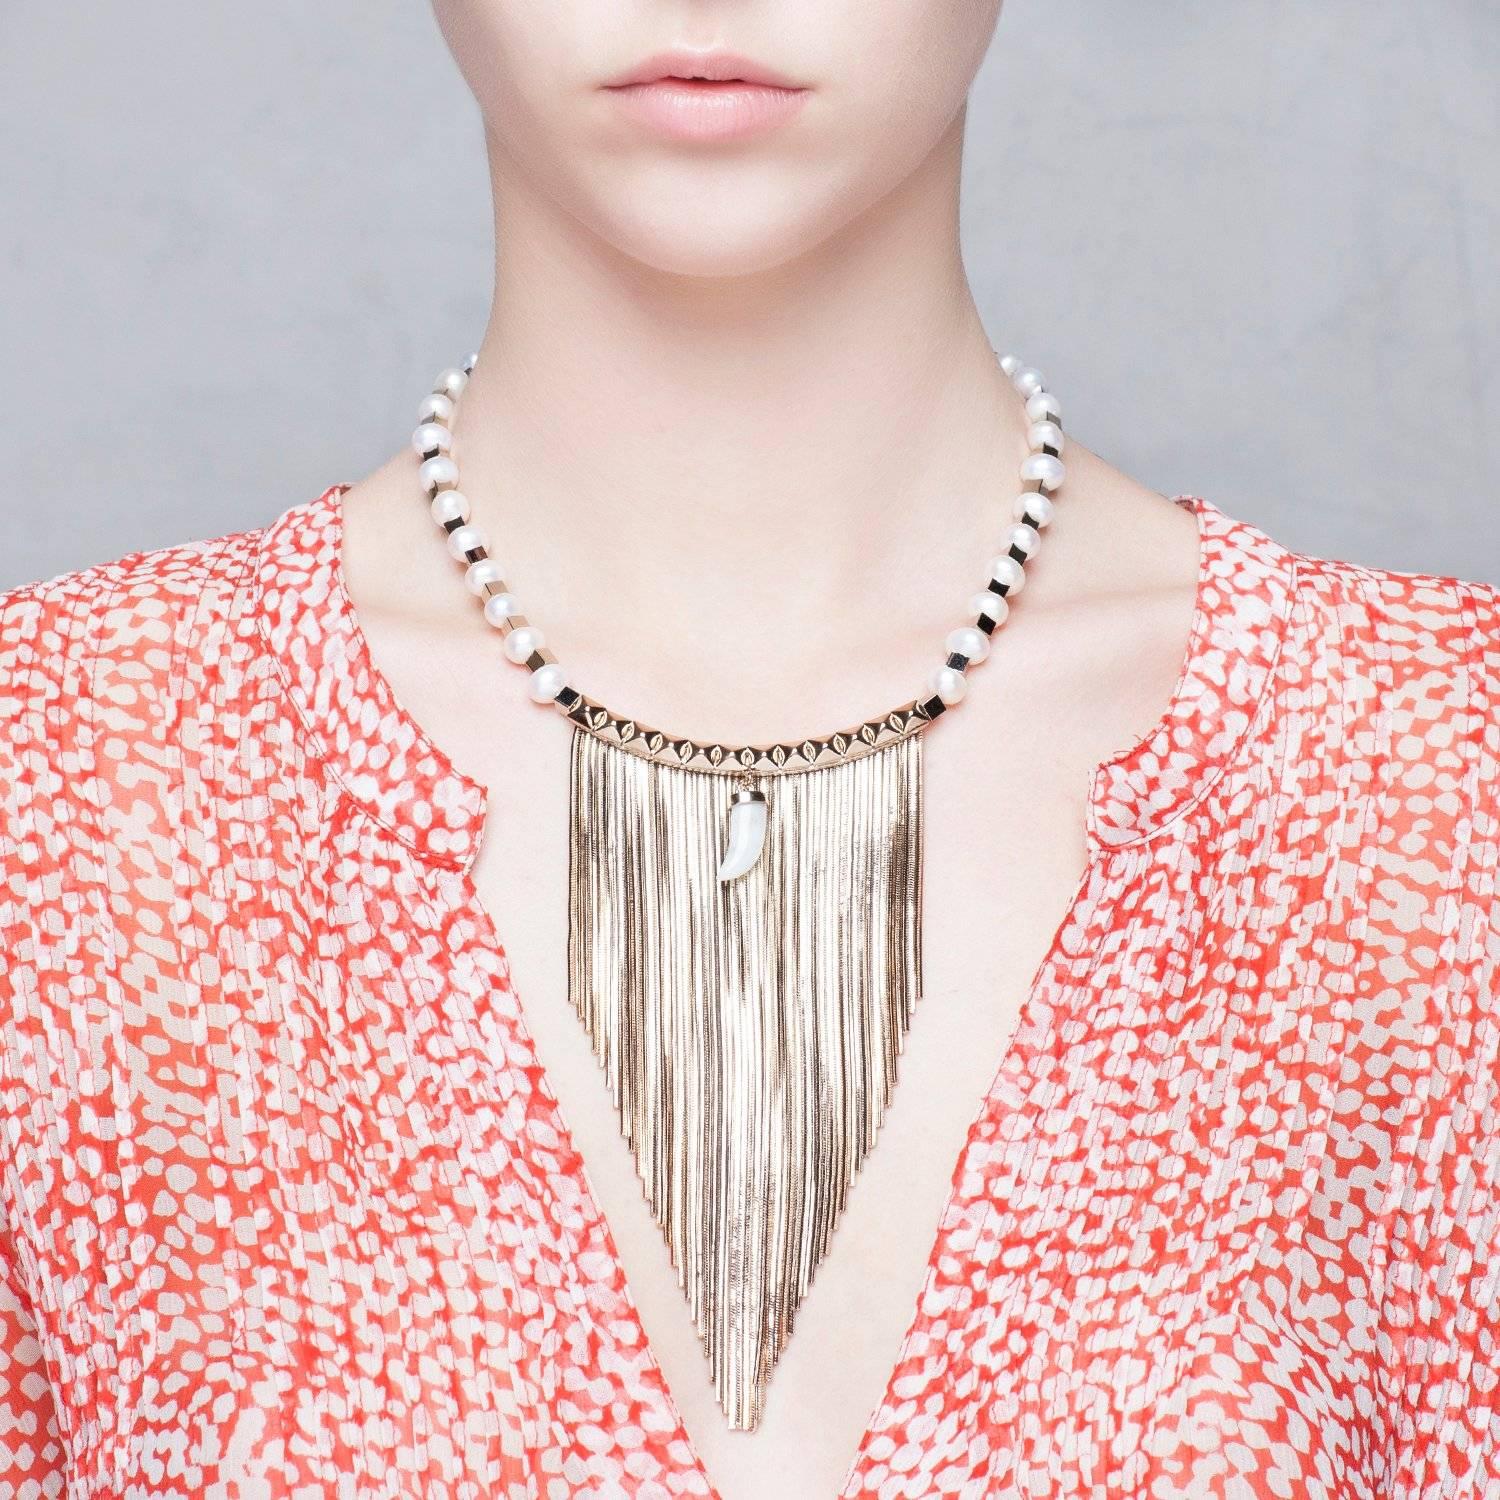 Bringing bohemian elegance to bib necklace, this fringed necklace features freshwater pearls alternated with gilded geometric brass beads. The piece is further enhanced by a studded central part with a jade horn shaped charm for an extra dose of